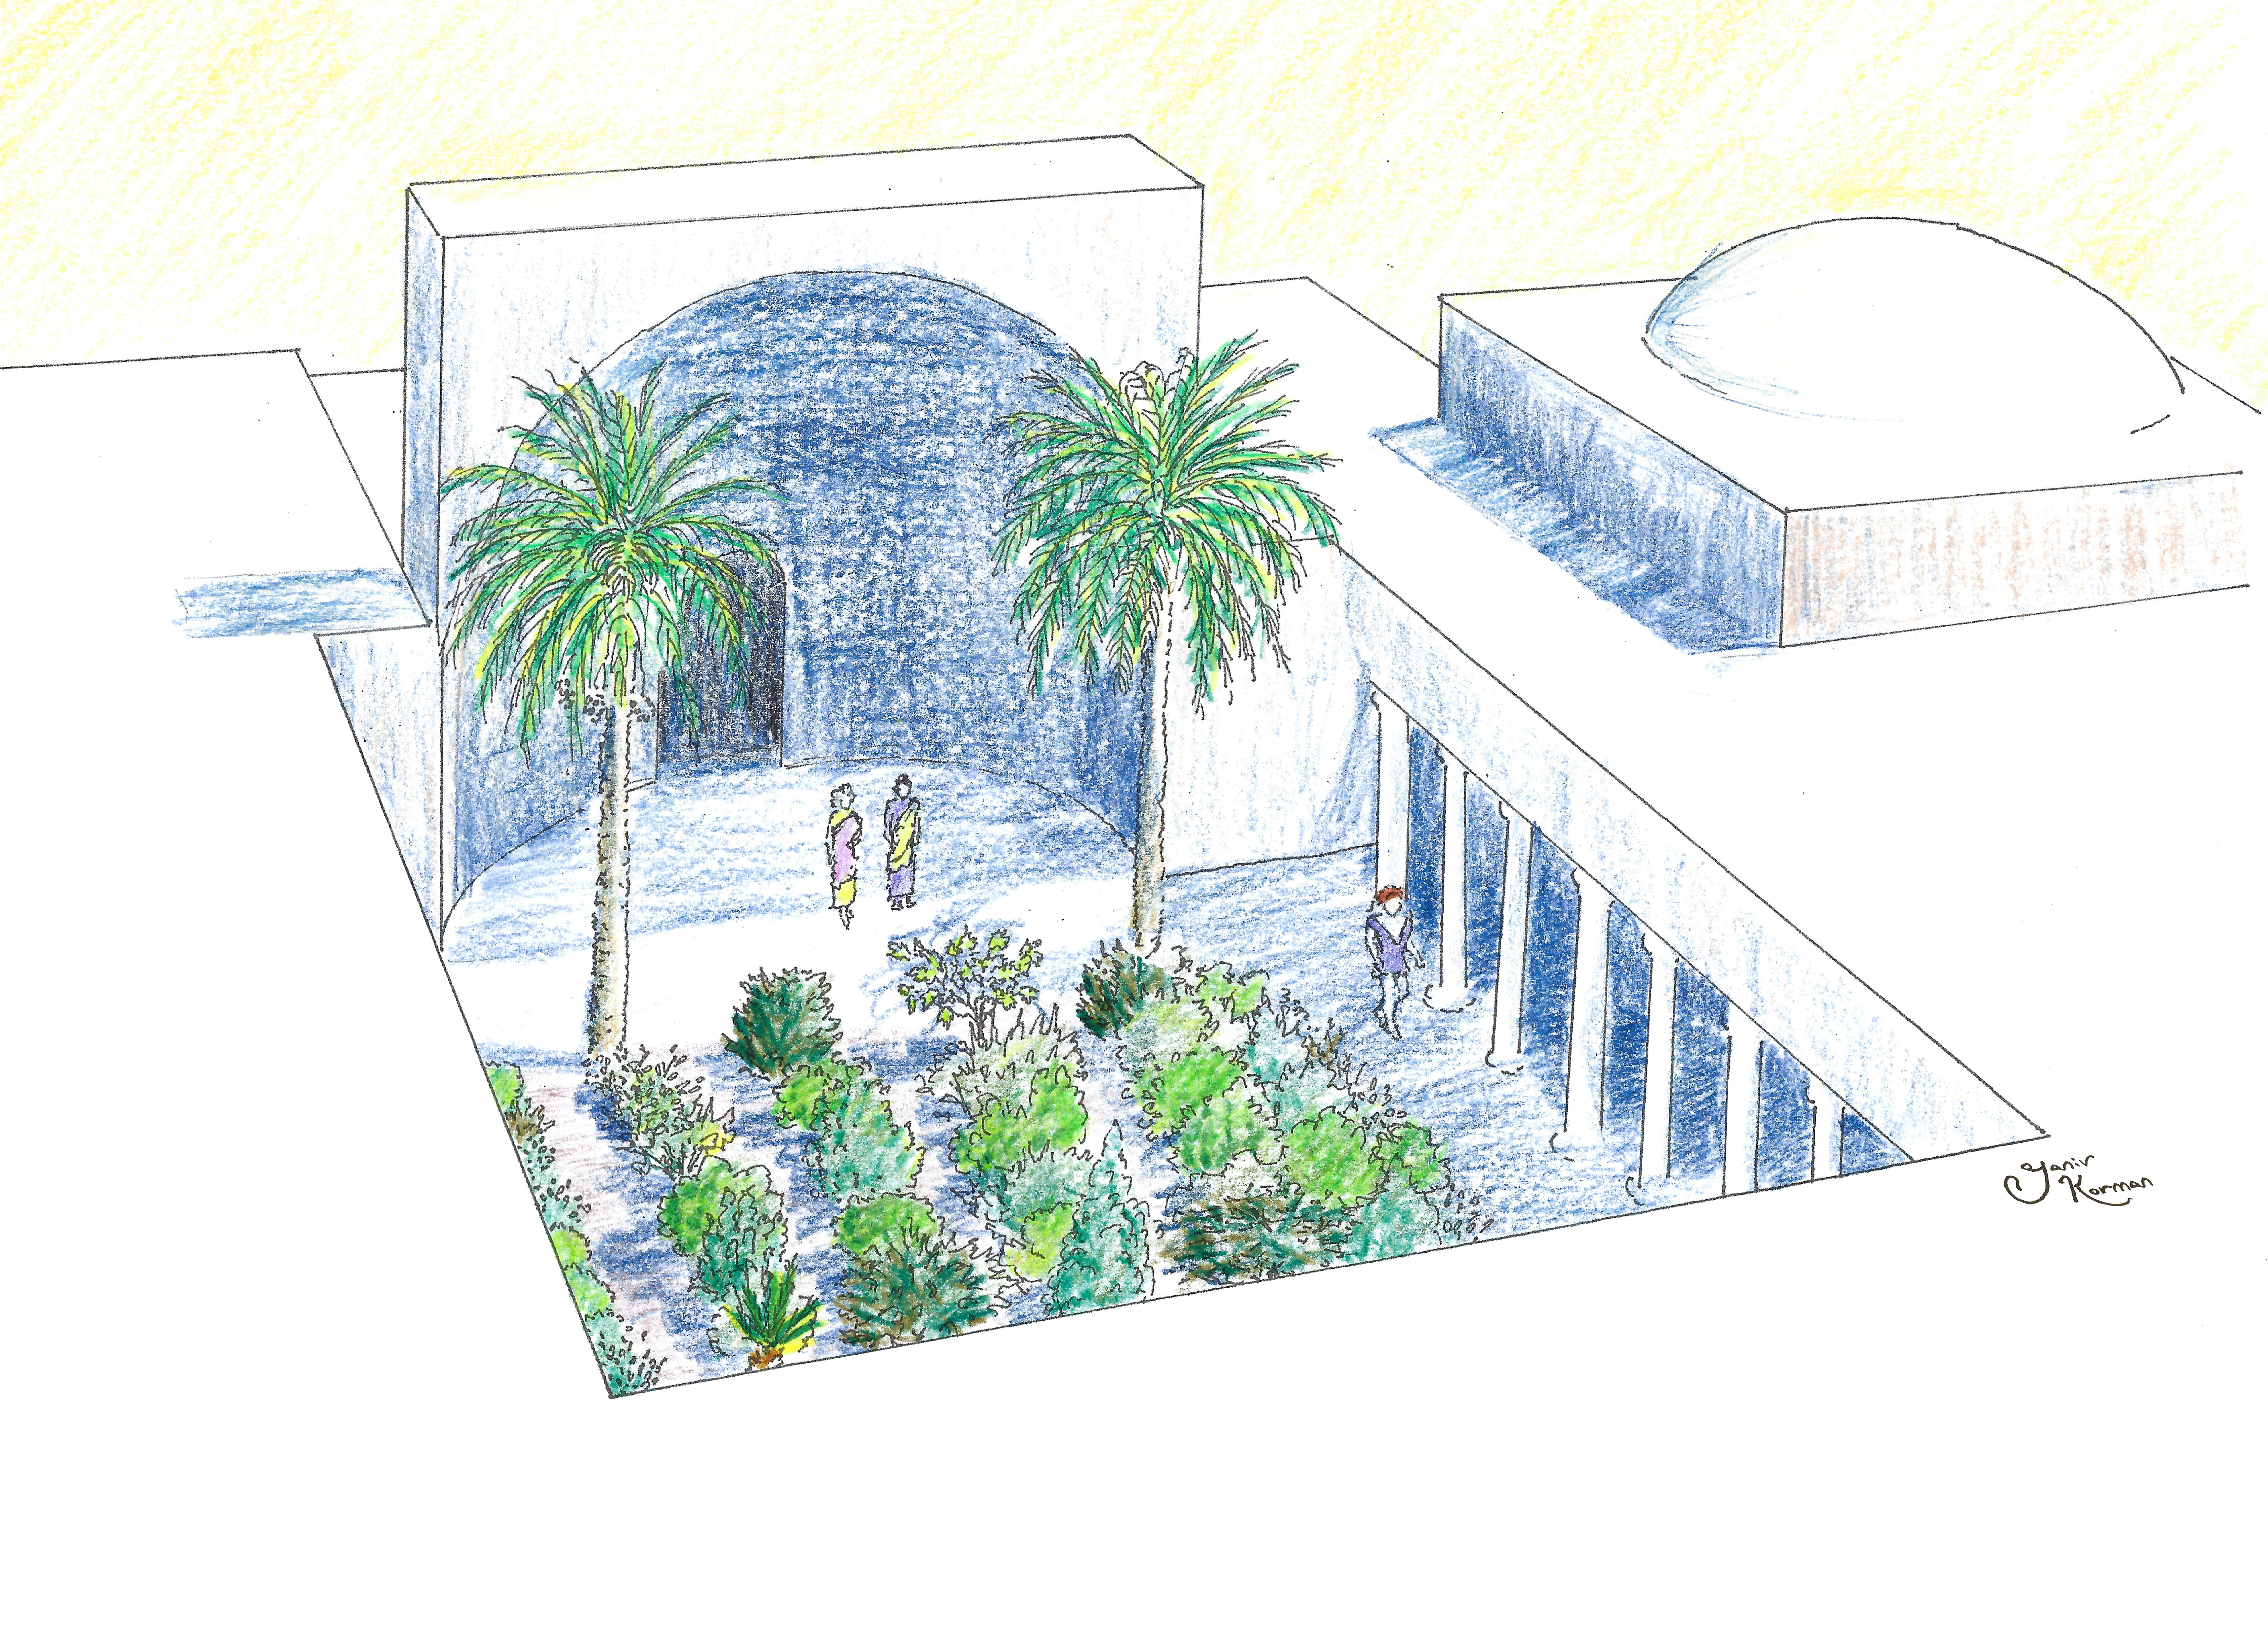 Figure 7: Axonometric reconstruction of the Ionic Peristyle Courtyard B64 with the location of the planting pots (Yaniv Korman).